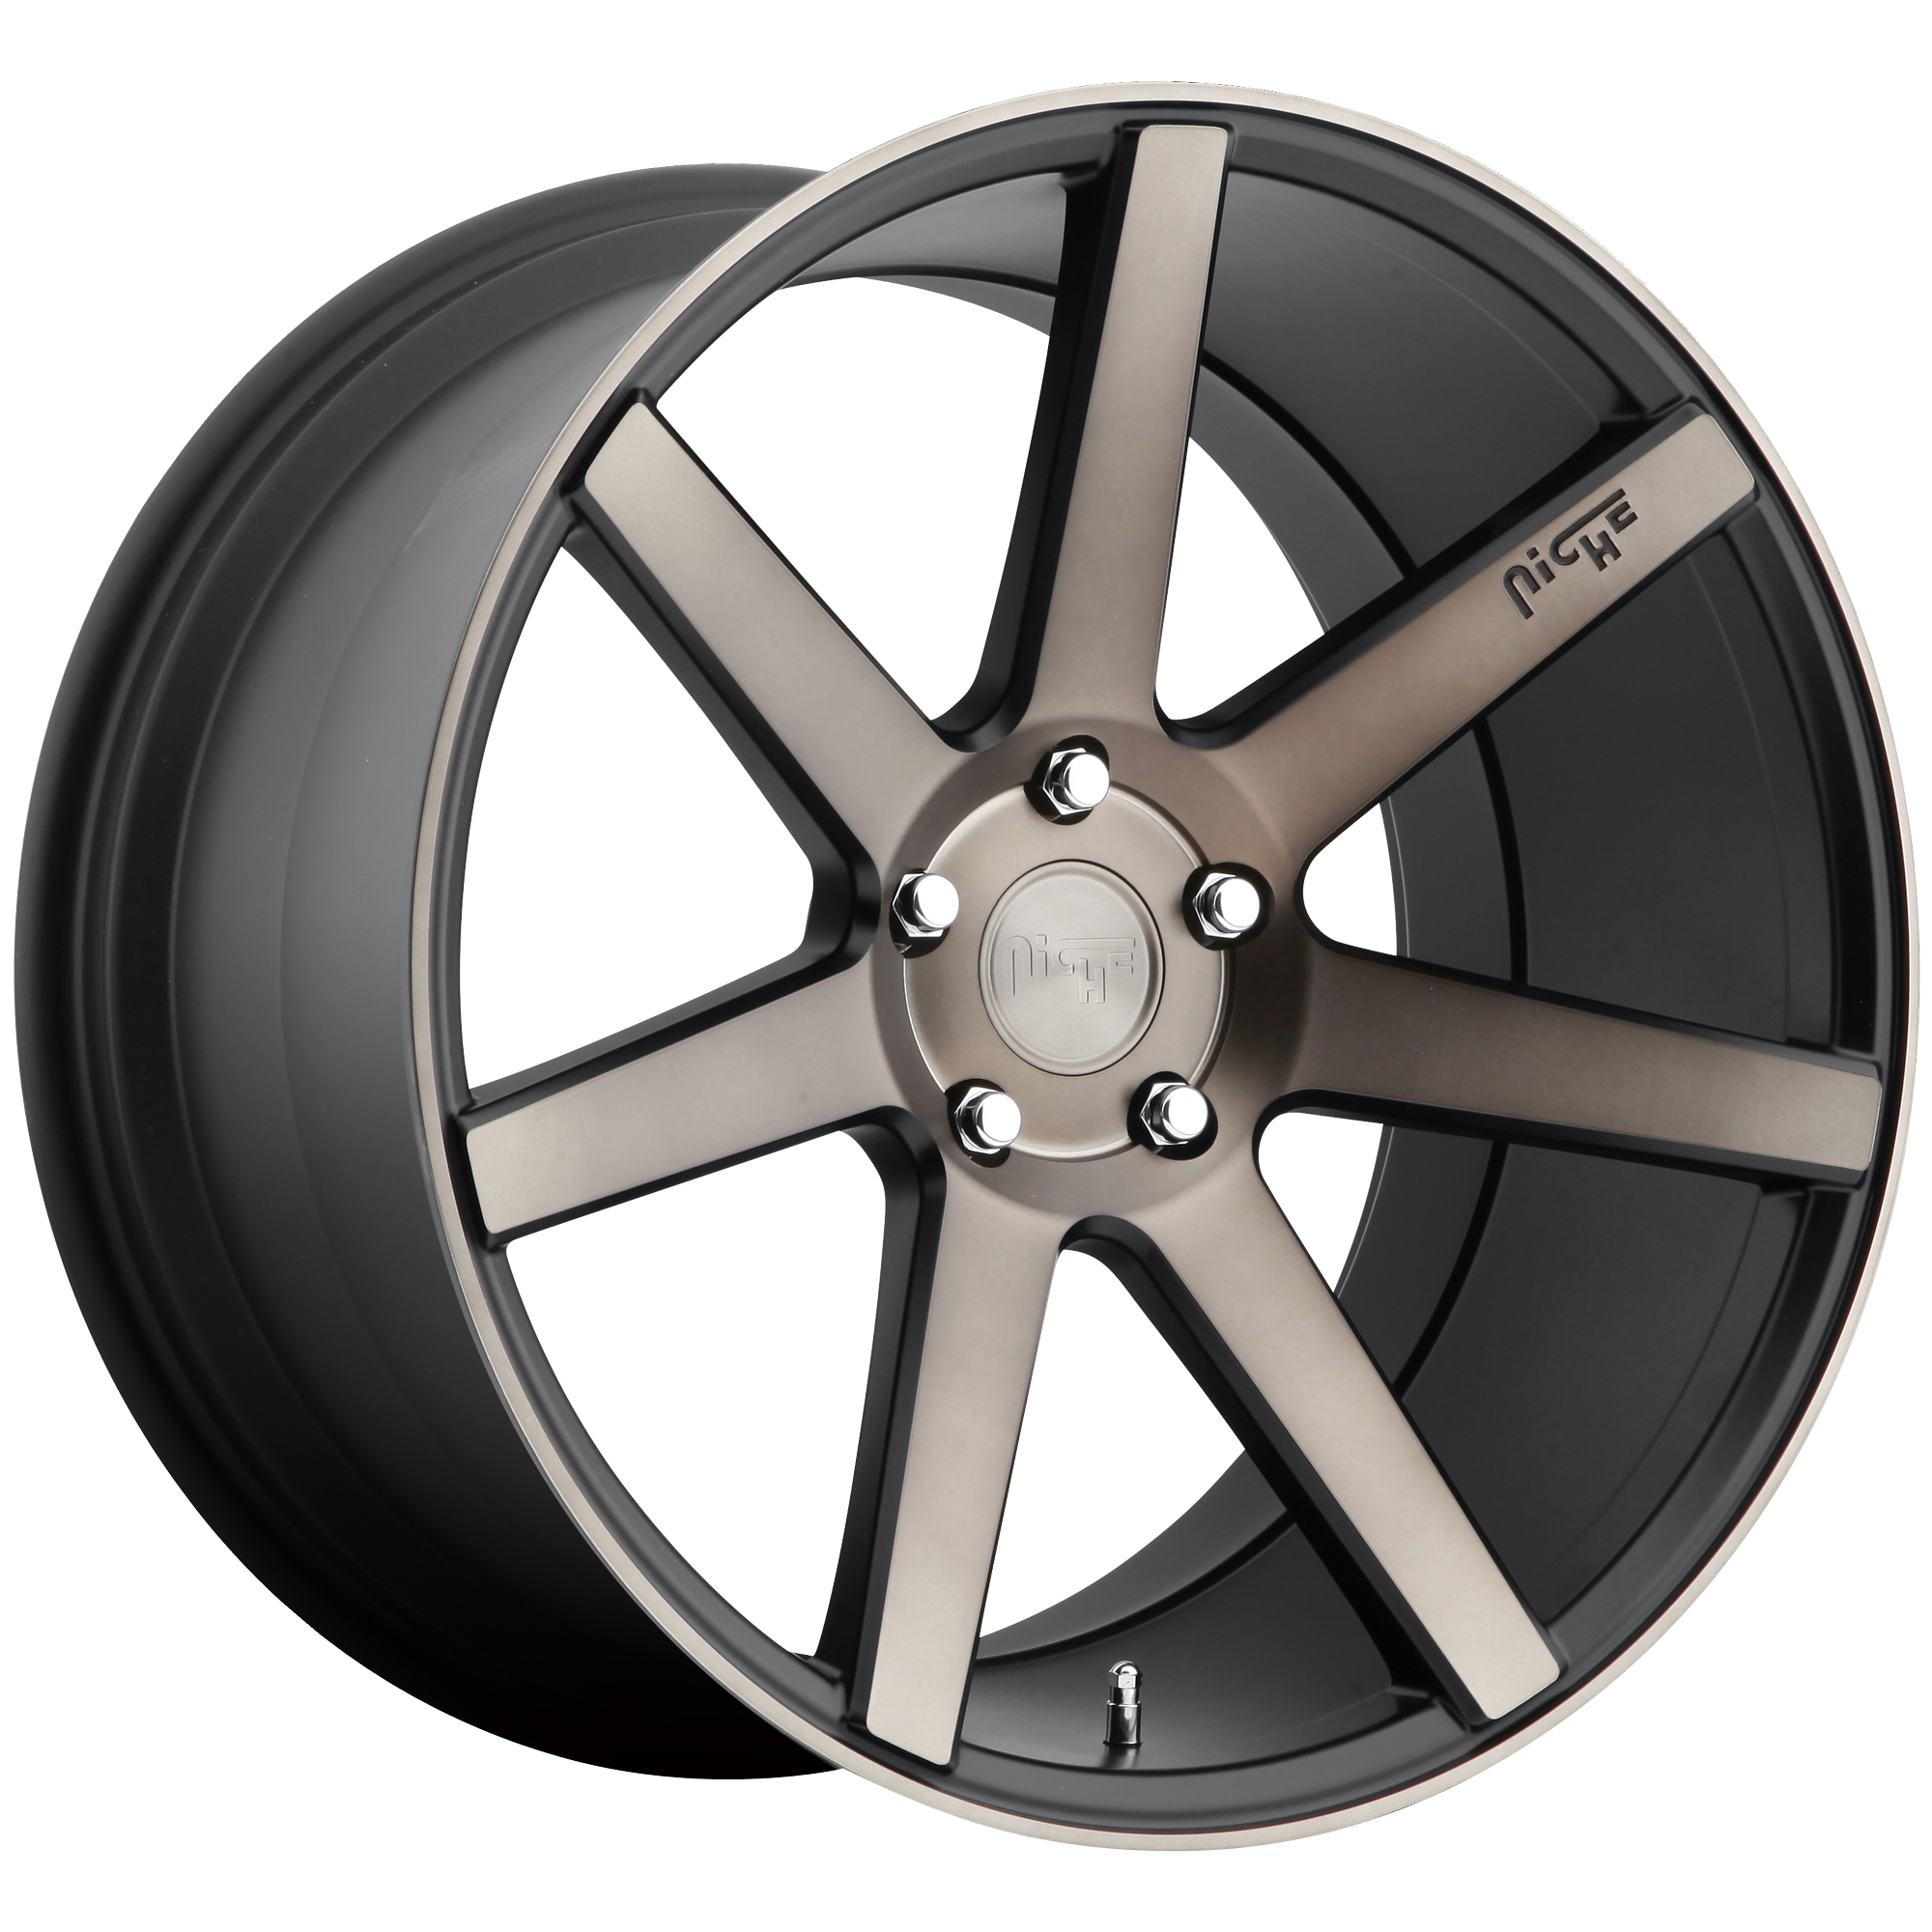 VERONA 19x9.5 5x114.30 MATTE BLACK MACHINED (35 mm) - Tires and Engine Performance